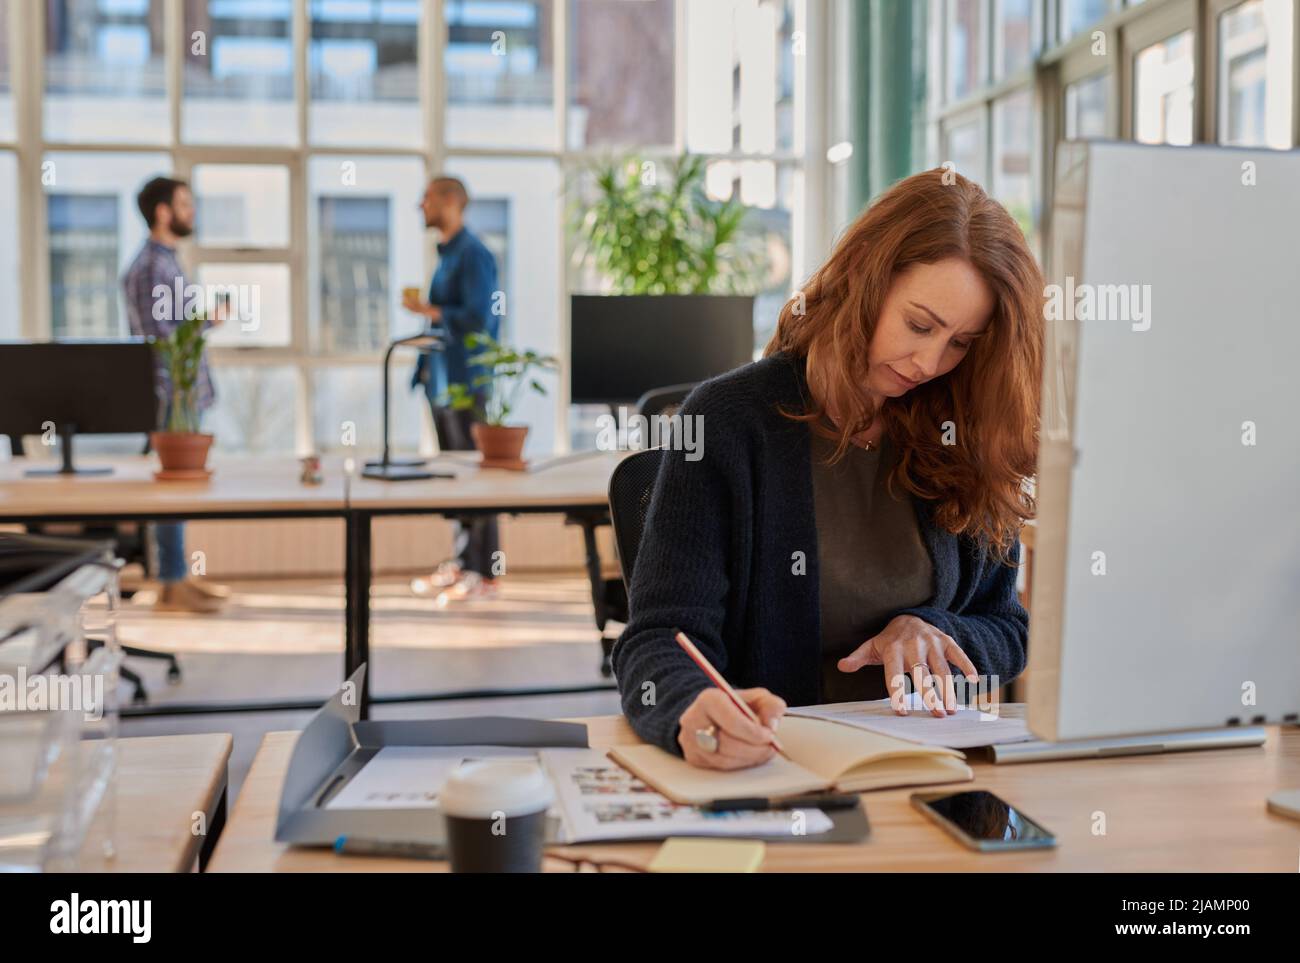 Businesswoman working at her office desk with colleagues in the background Stock Photo